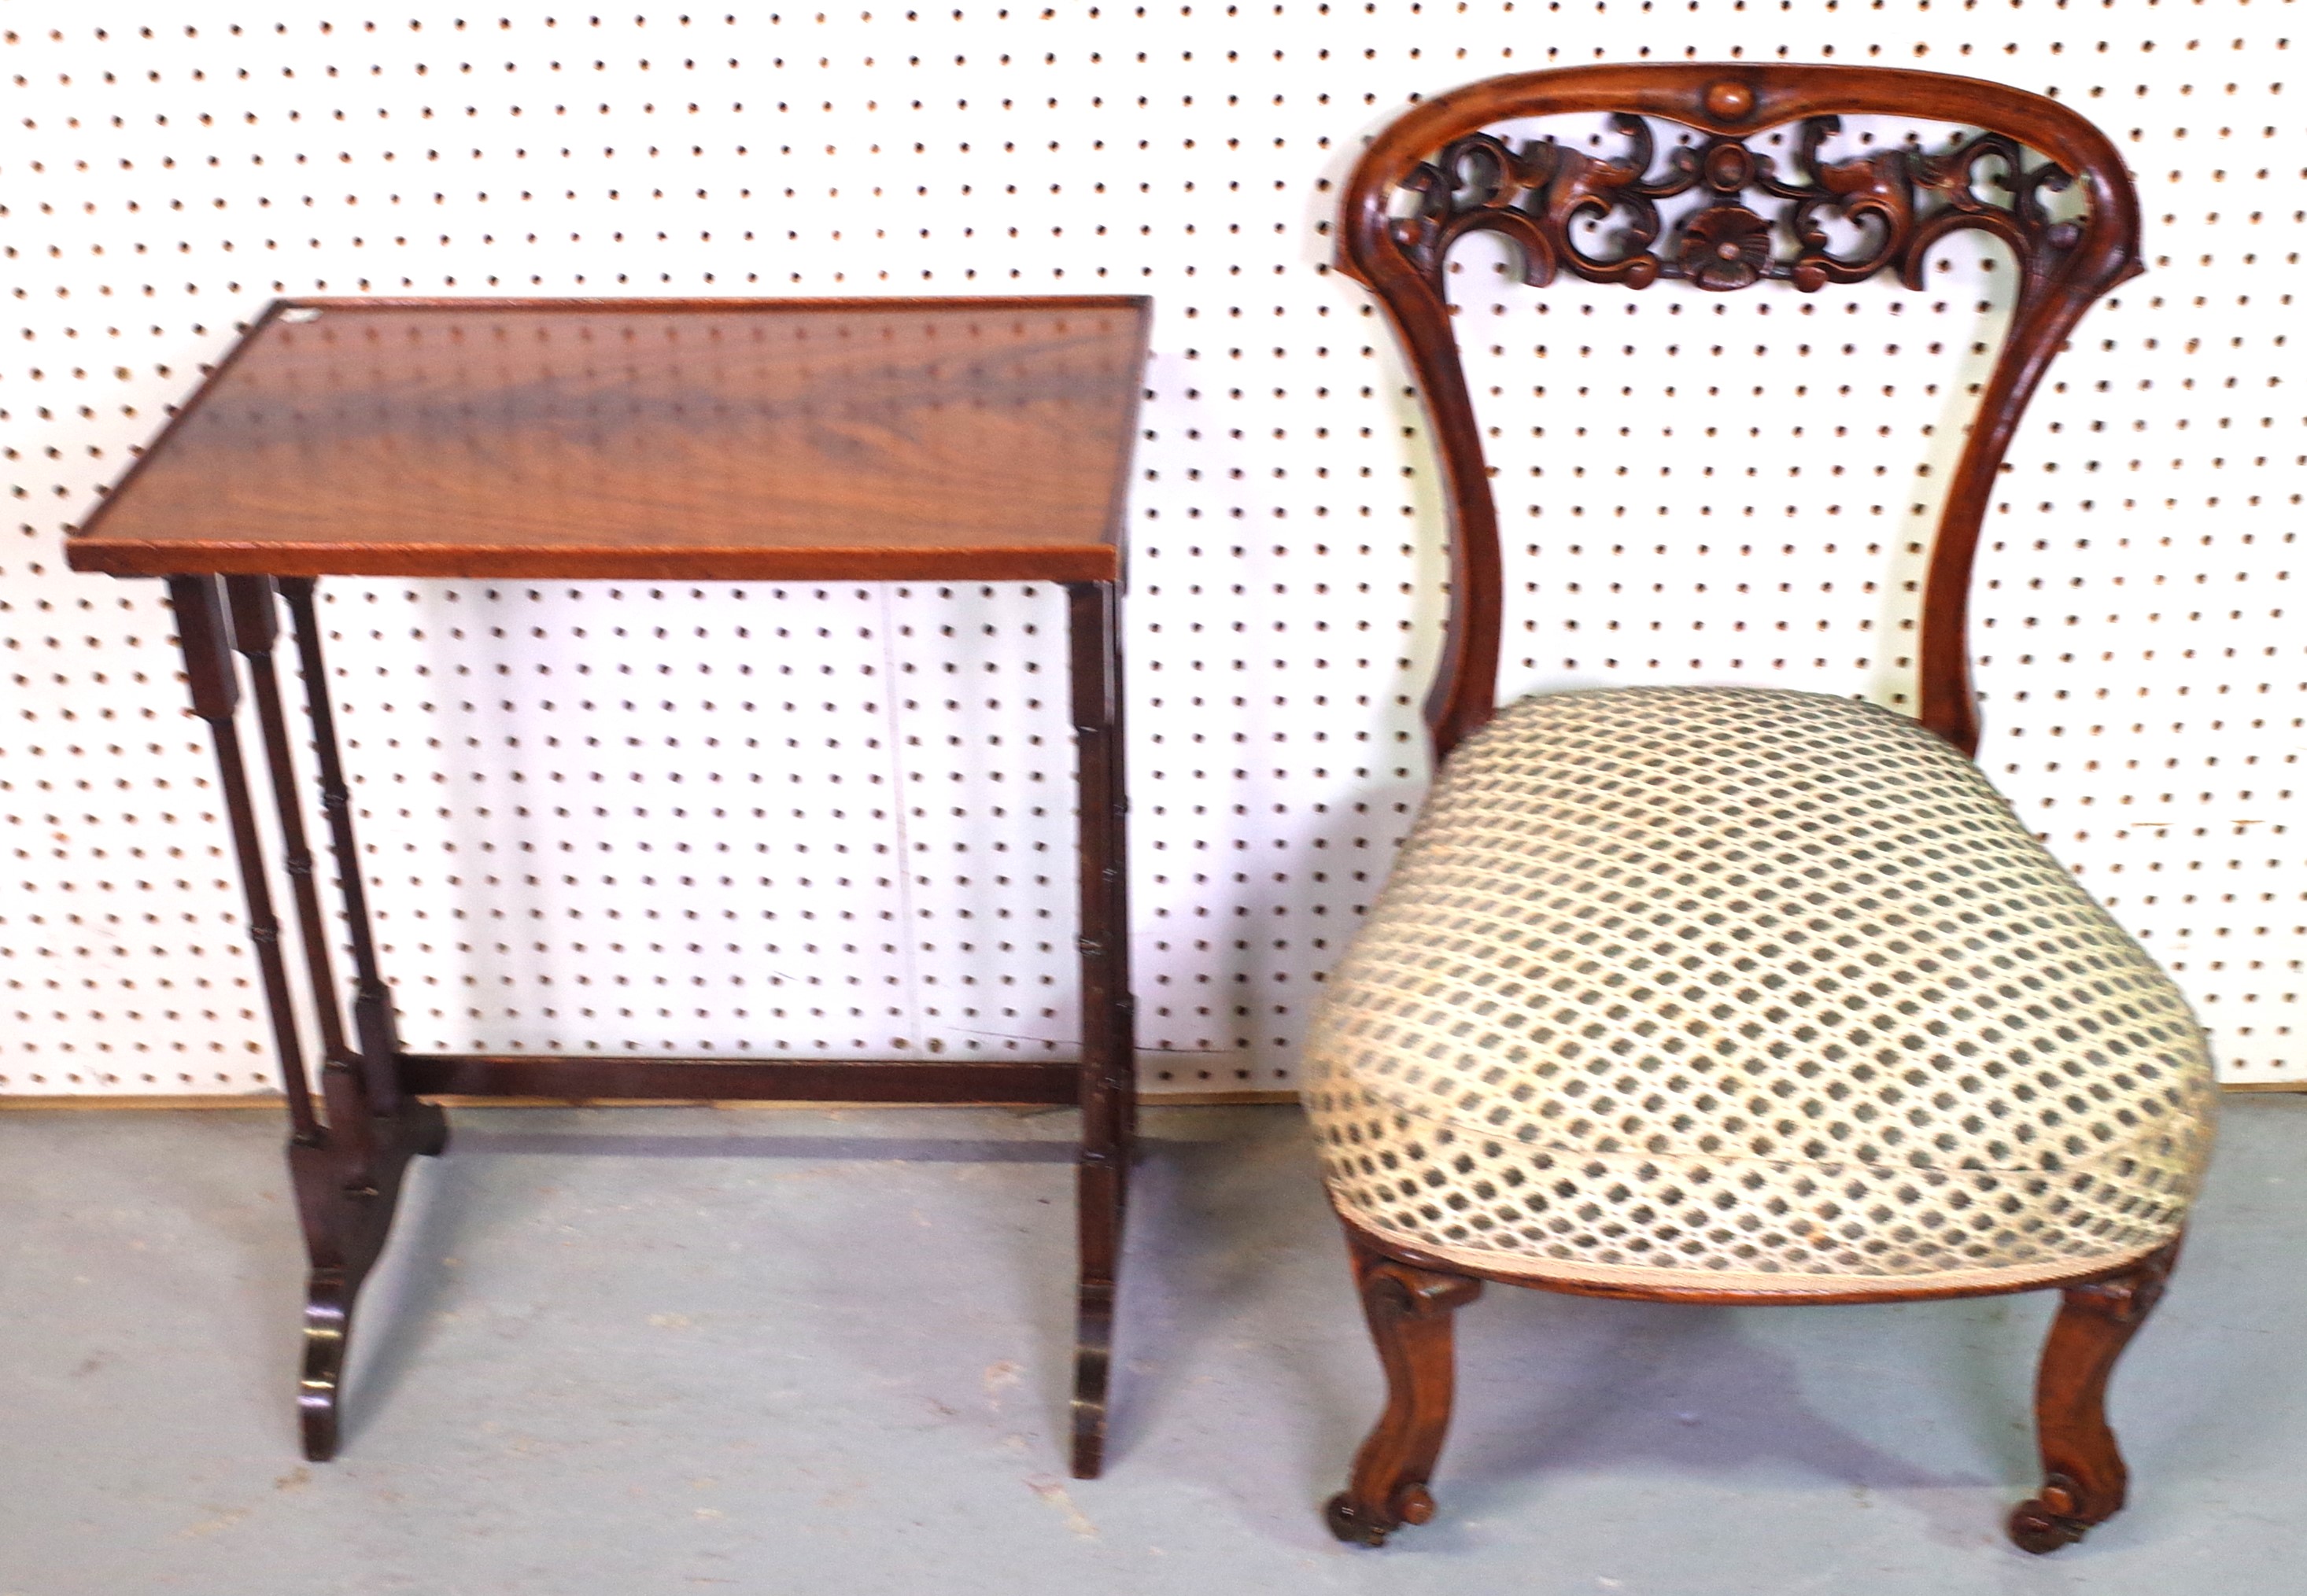 A VICTORIAN WALNUT LOW SIDE CHAIR AND A MODERN MAHOGANY SIDE TABLE (2)